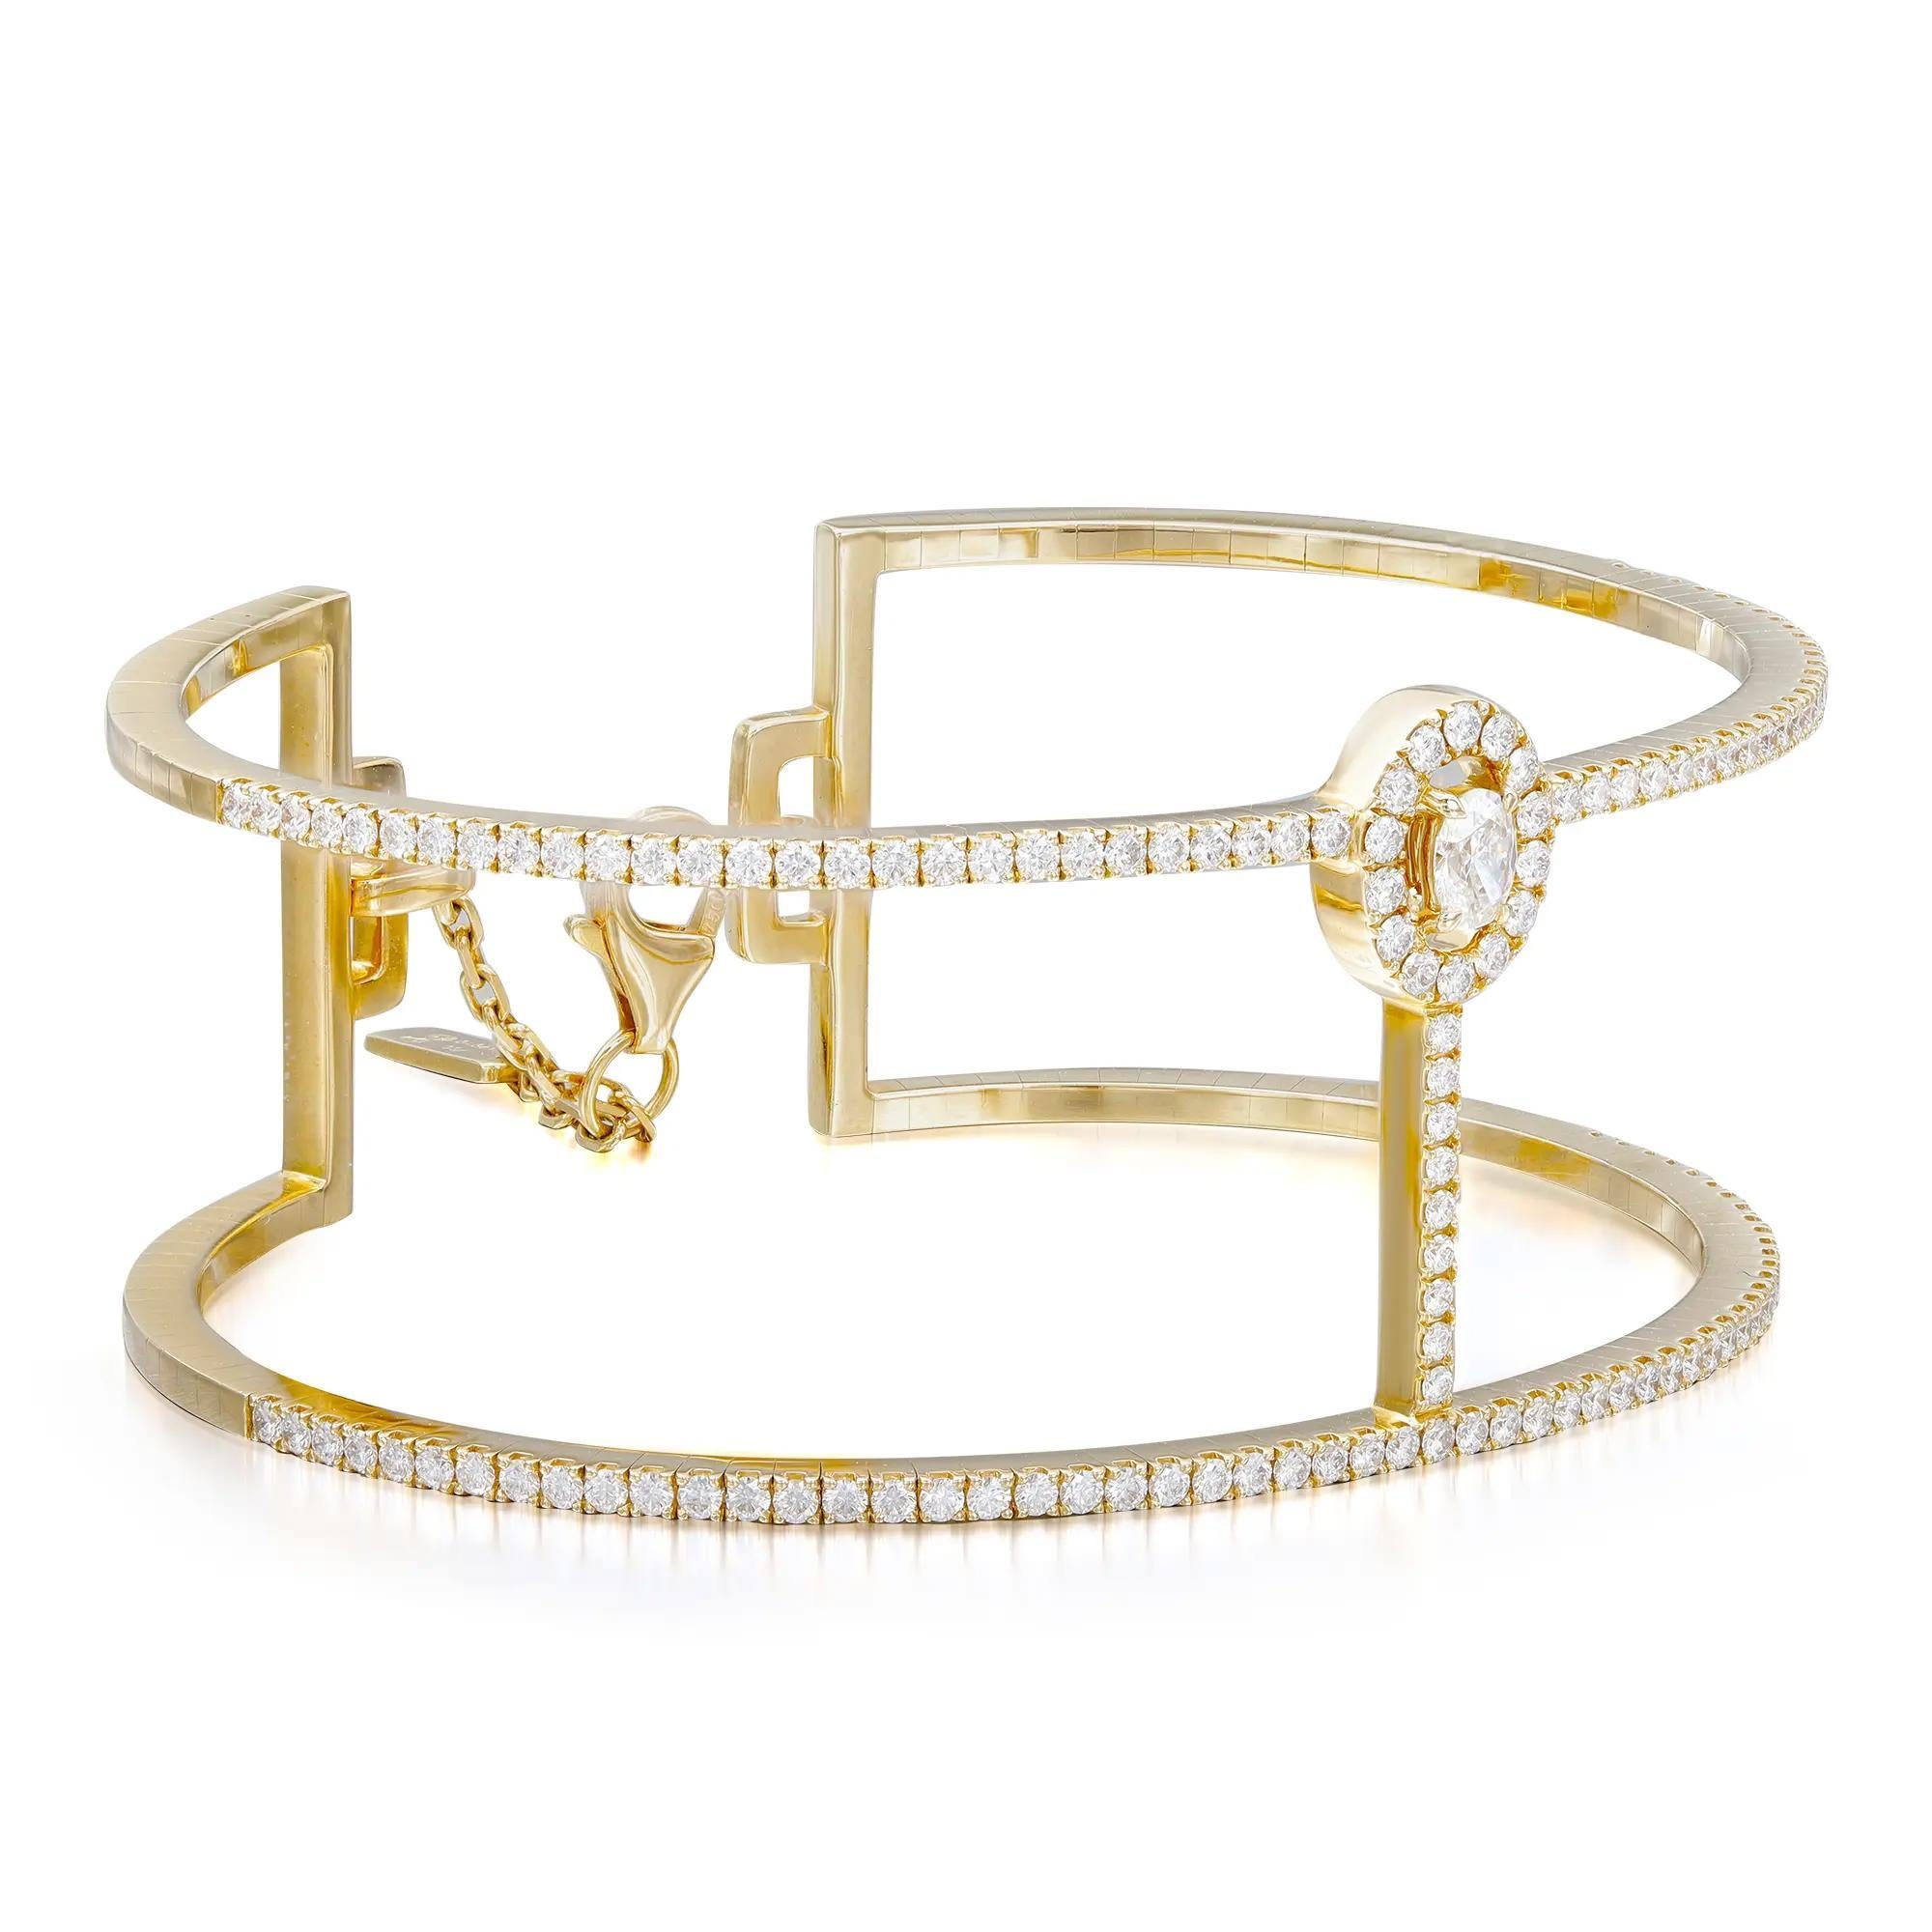 Walk with grace with this gorgeous Messika Manch Glam'Azone diamond 2 rows cuff bracelet. Crafted in lustrous 18K yellow gold. It features center prong set oval cut diamond accented with round brilliant cut diamonds halfway through the bracelet.